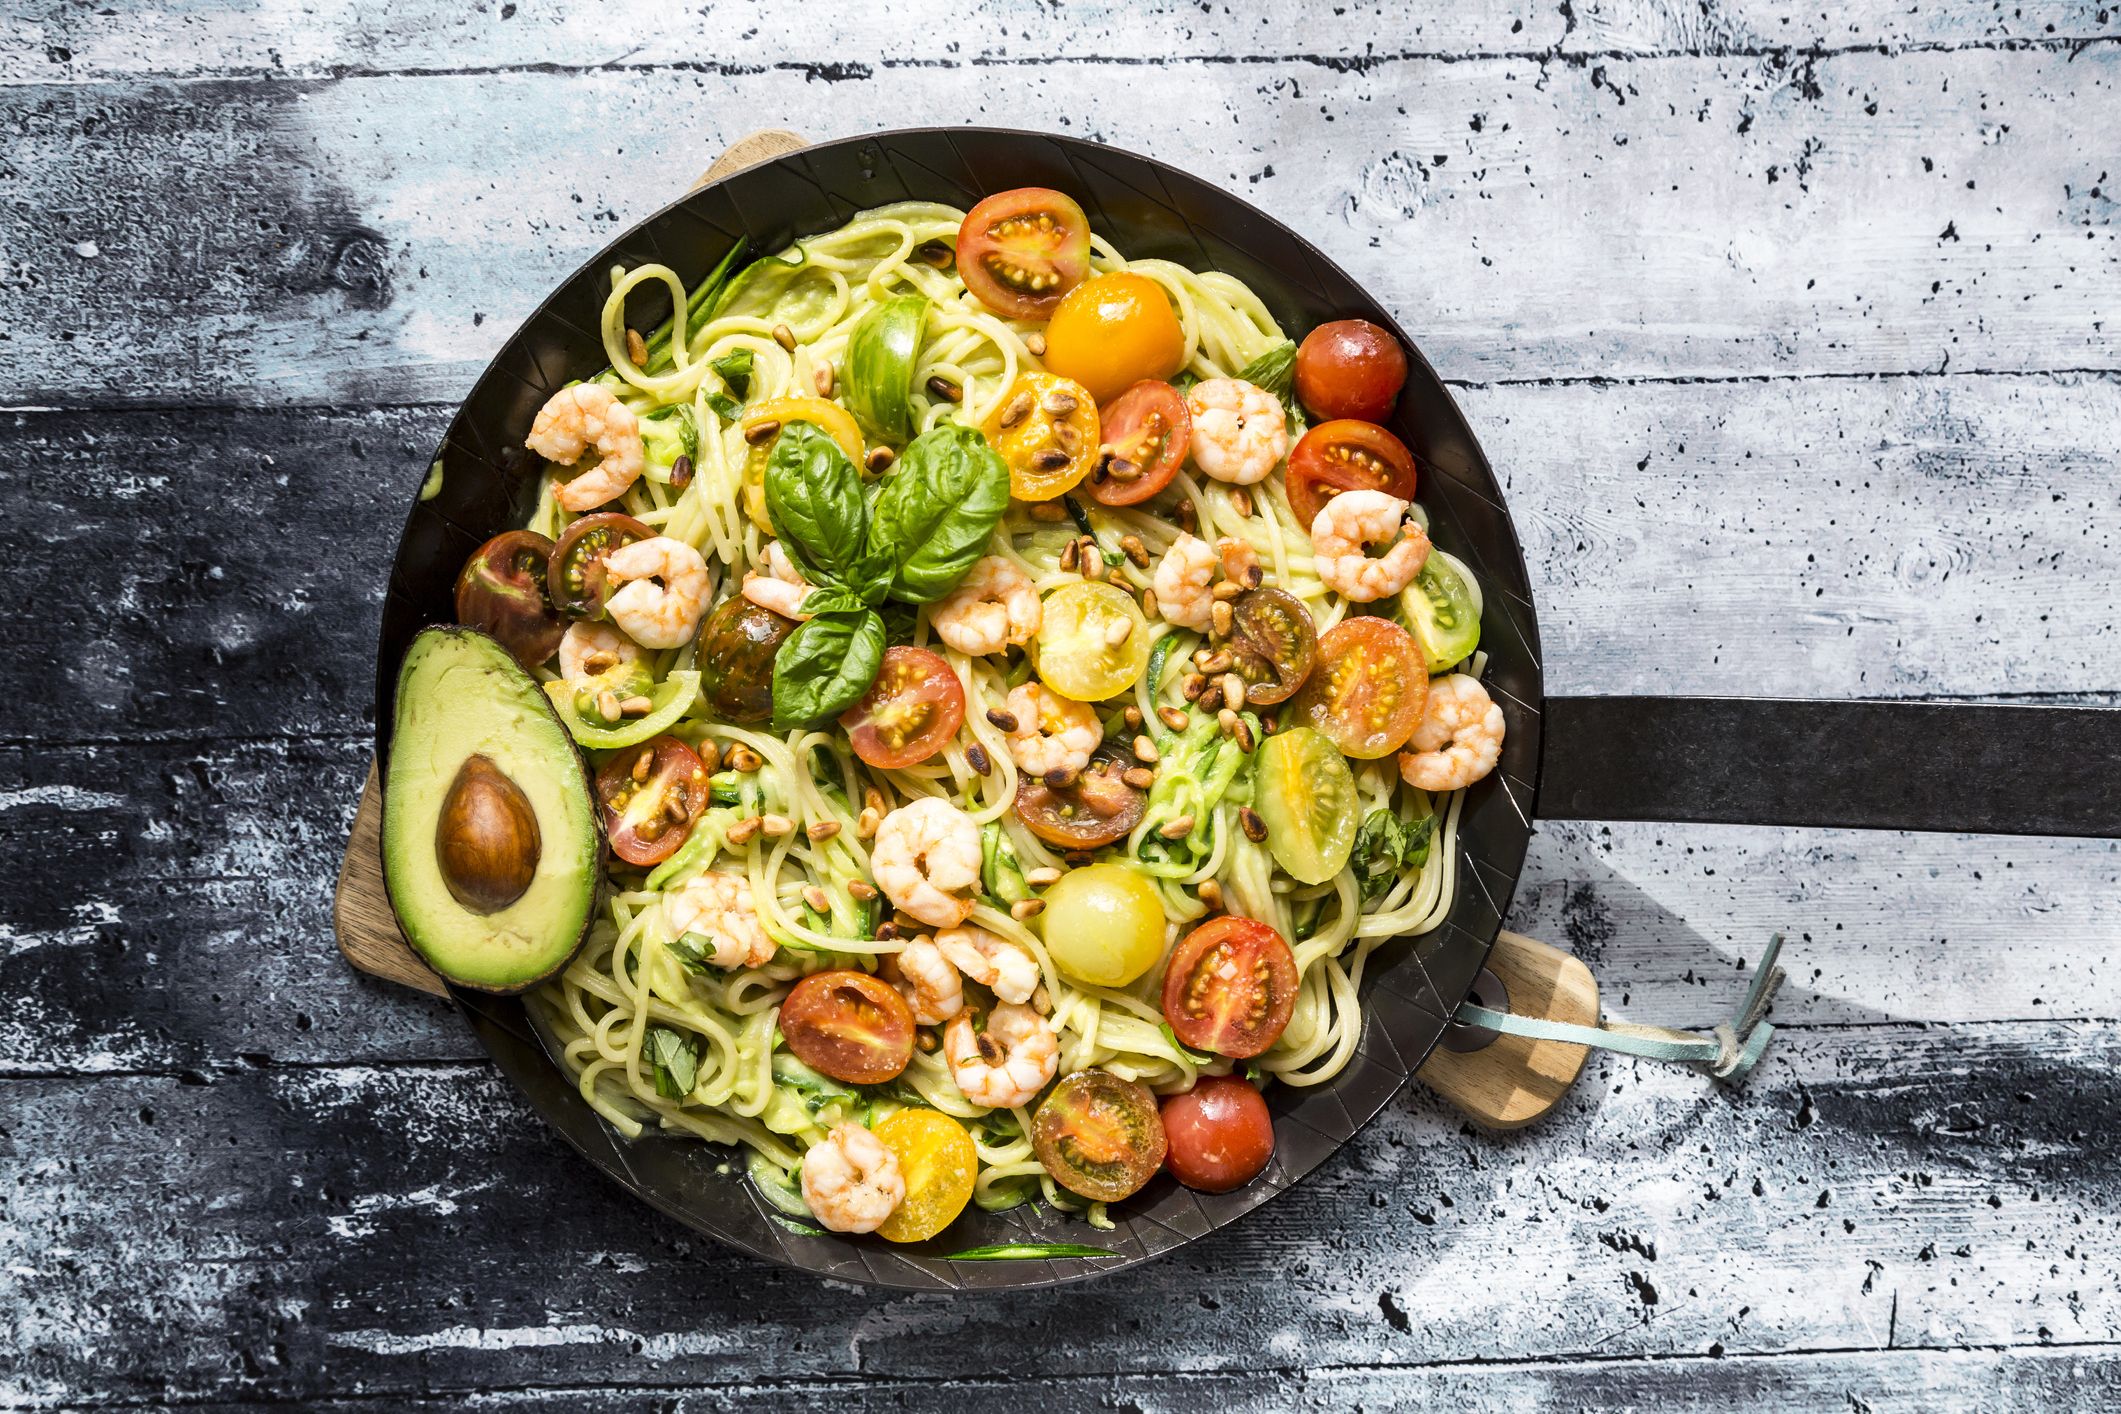 10 Best Low-Carb Pasta Alternatives, According to a Dietitian